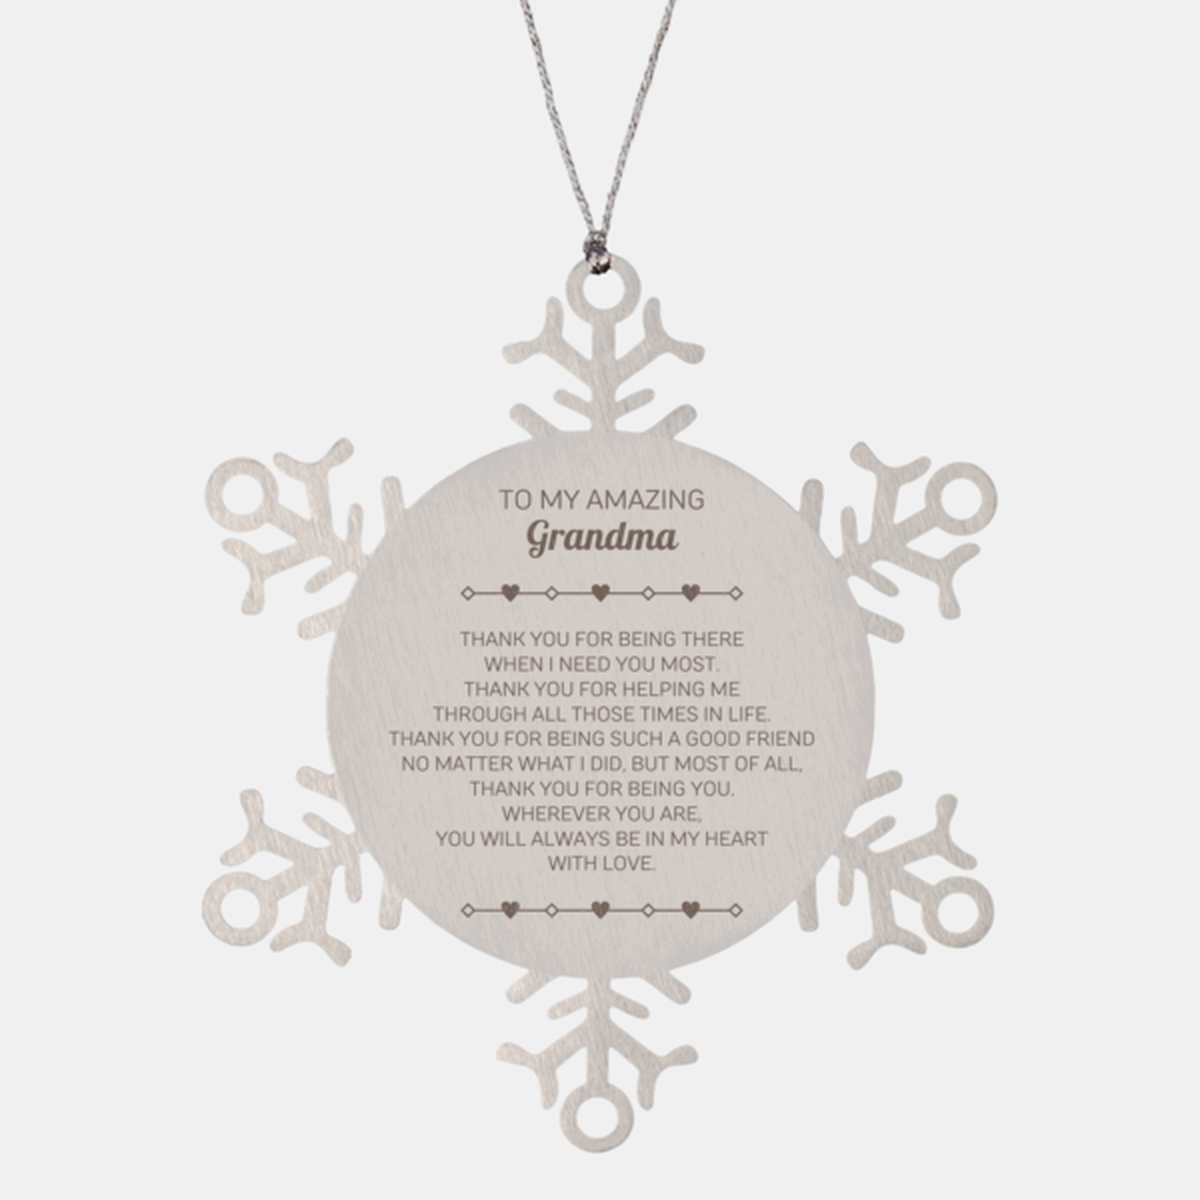 To My Amazing Grandma Snowflake Ornament, Thank you for being there, Thank You Gifts For Grandma, Birthday, Christmas Unique Gifts For Grandma